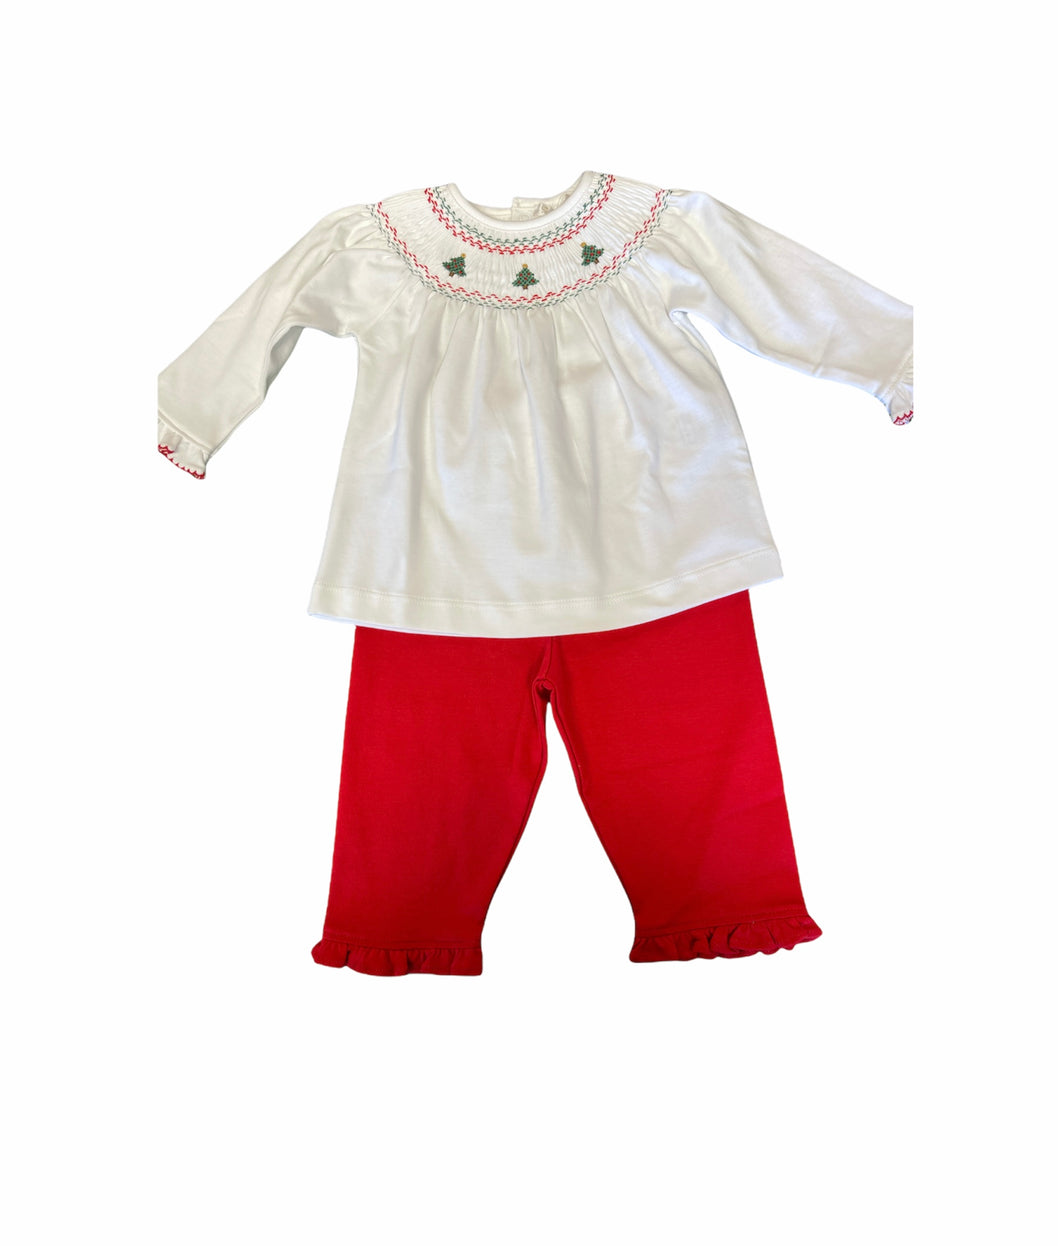 CLB Holiday Medley 21 White/Red Hand Smocked Pant Set